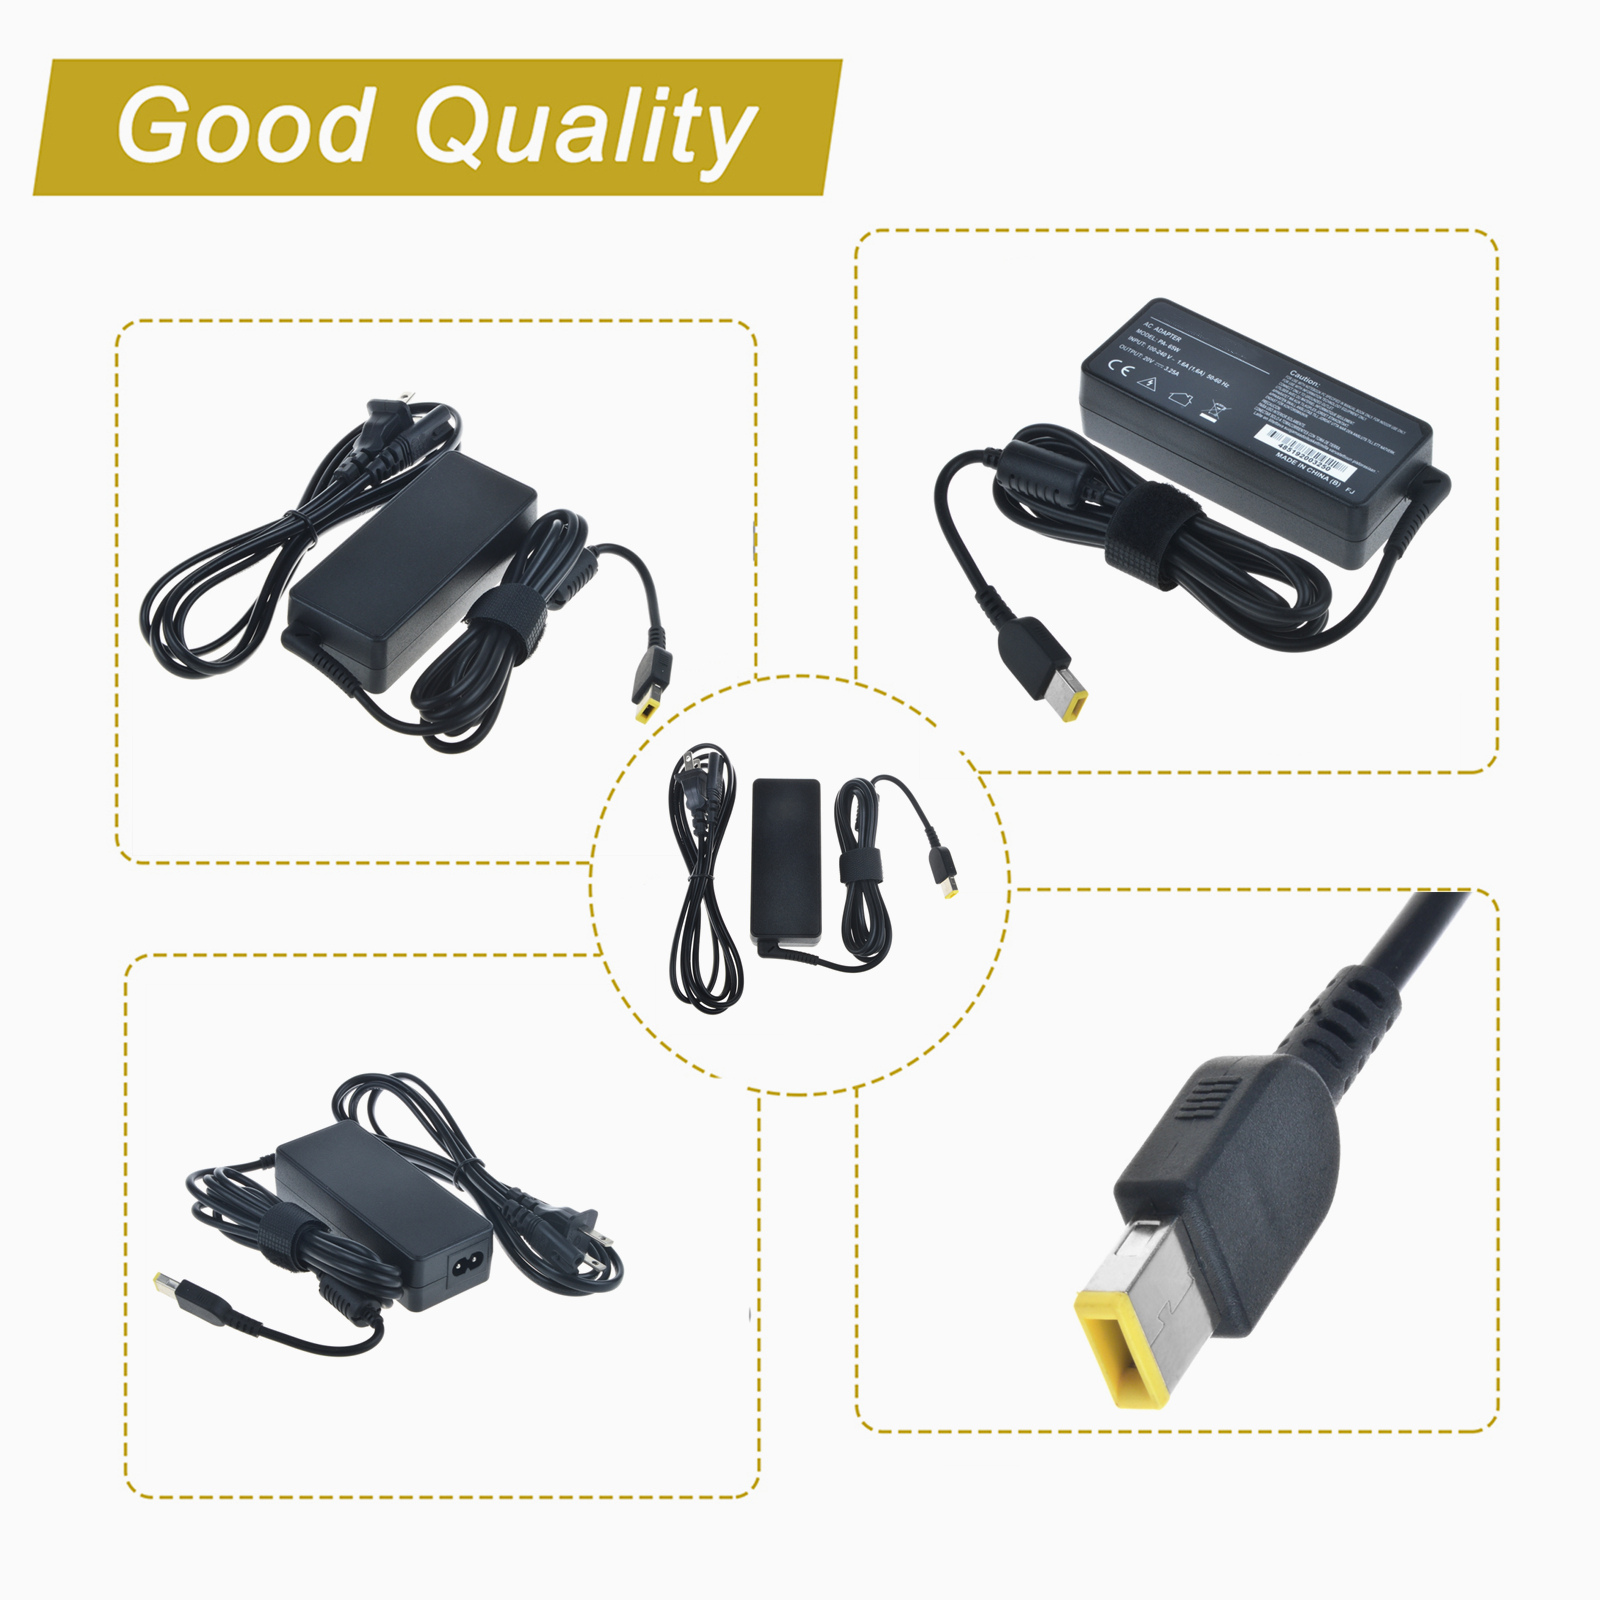 KONKIN BOO Compatible AC/DC Adapter Replacement for Lenovo P/4X20E53337 4X20E53338 4X20E53339 4X20E53340 4X20E53343 4X20E53344 4X20E53345 Power Supply Cord Cable PS Charger Mains PSU - image 2 of 5